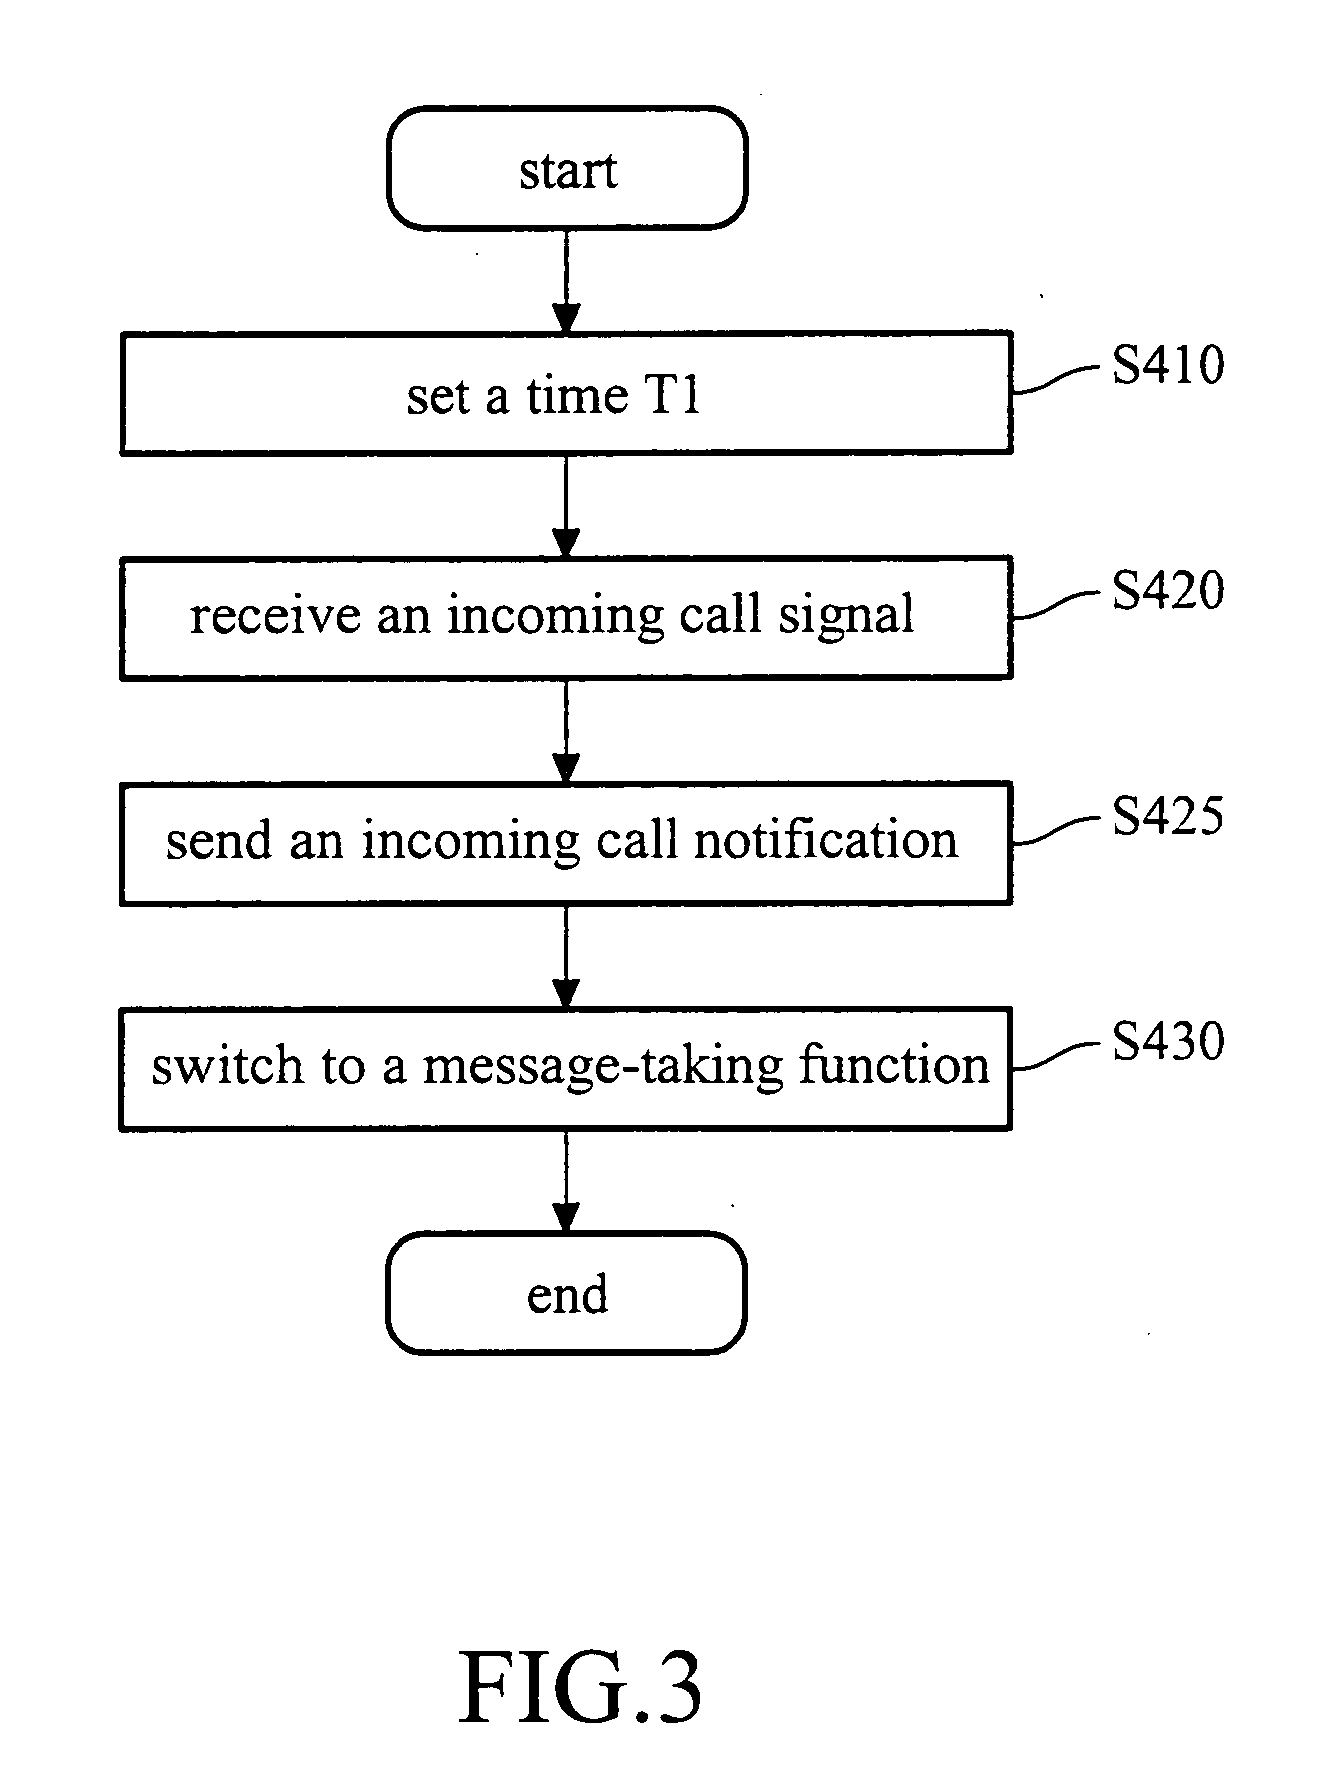 Method of providing an electronic answering function to a wireless phone